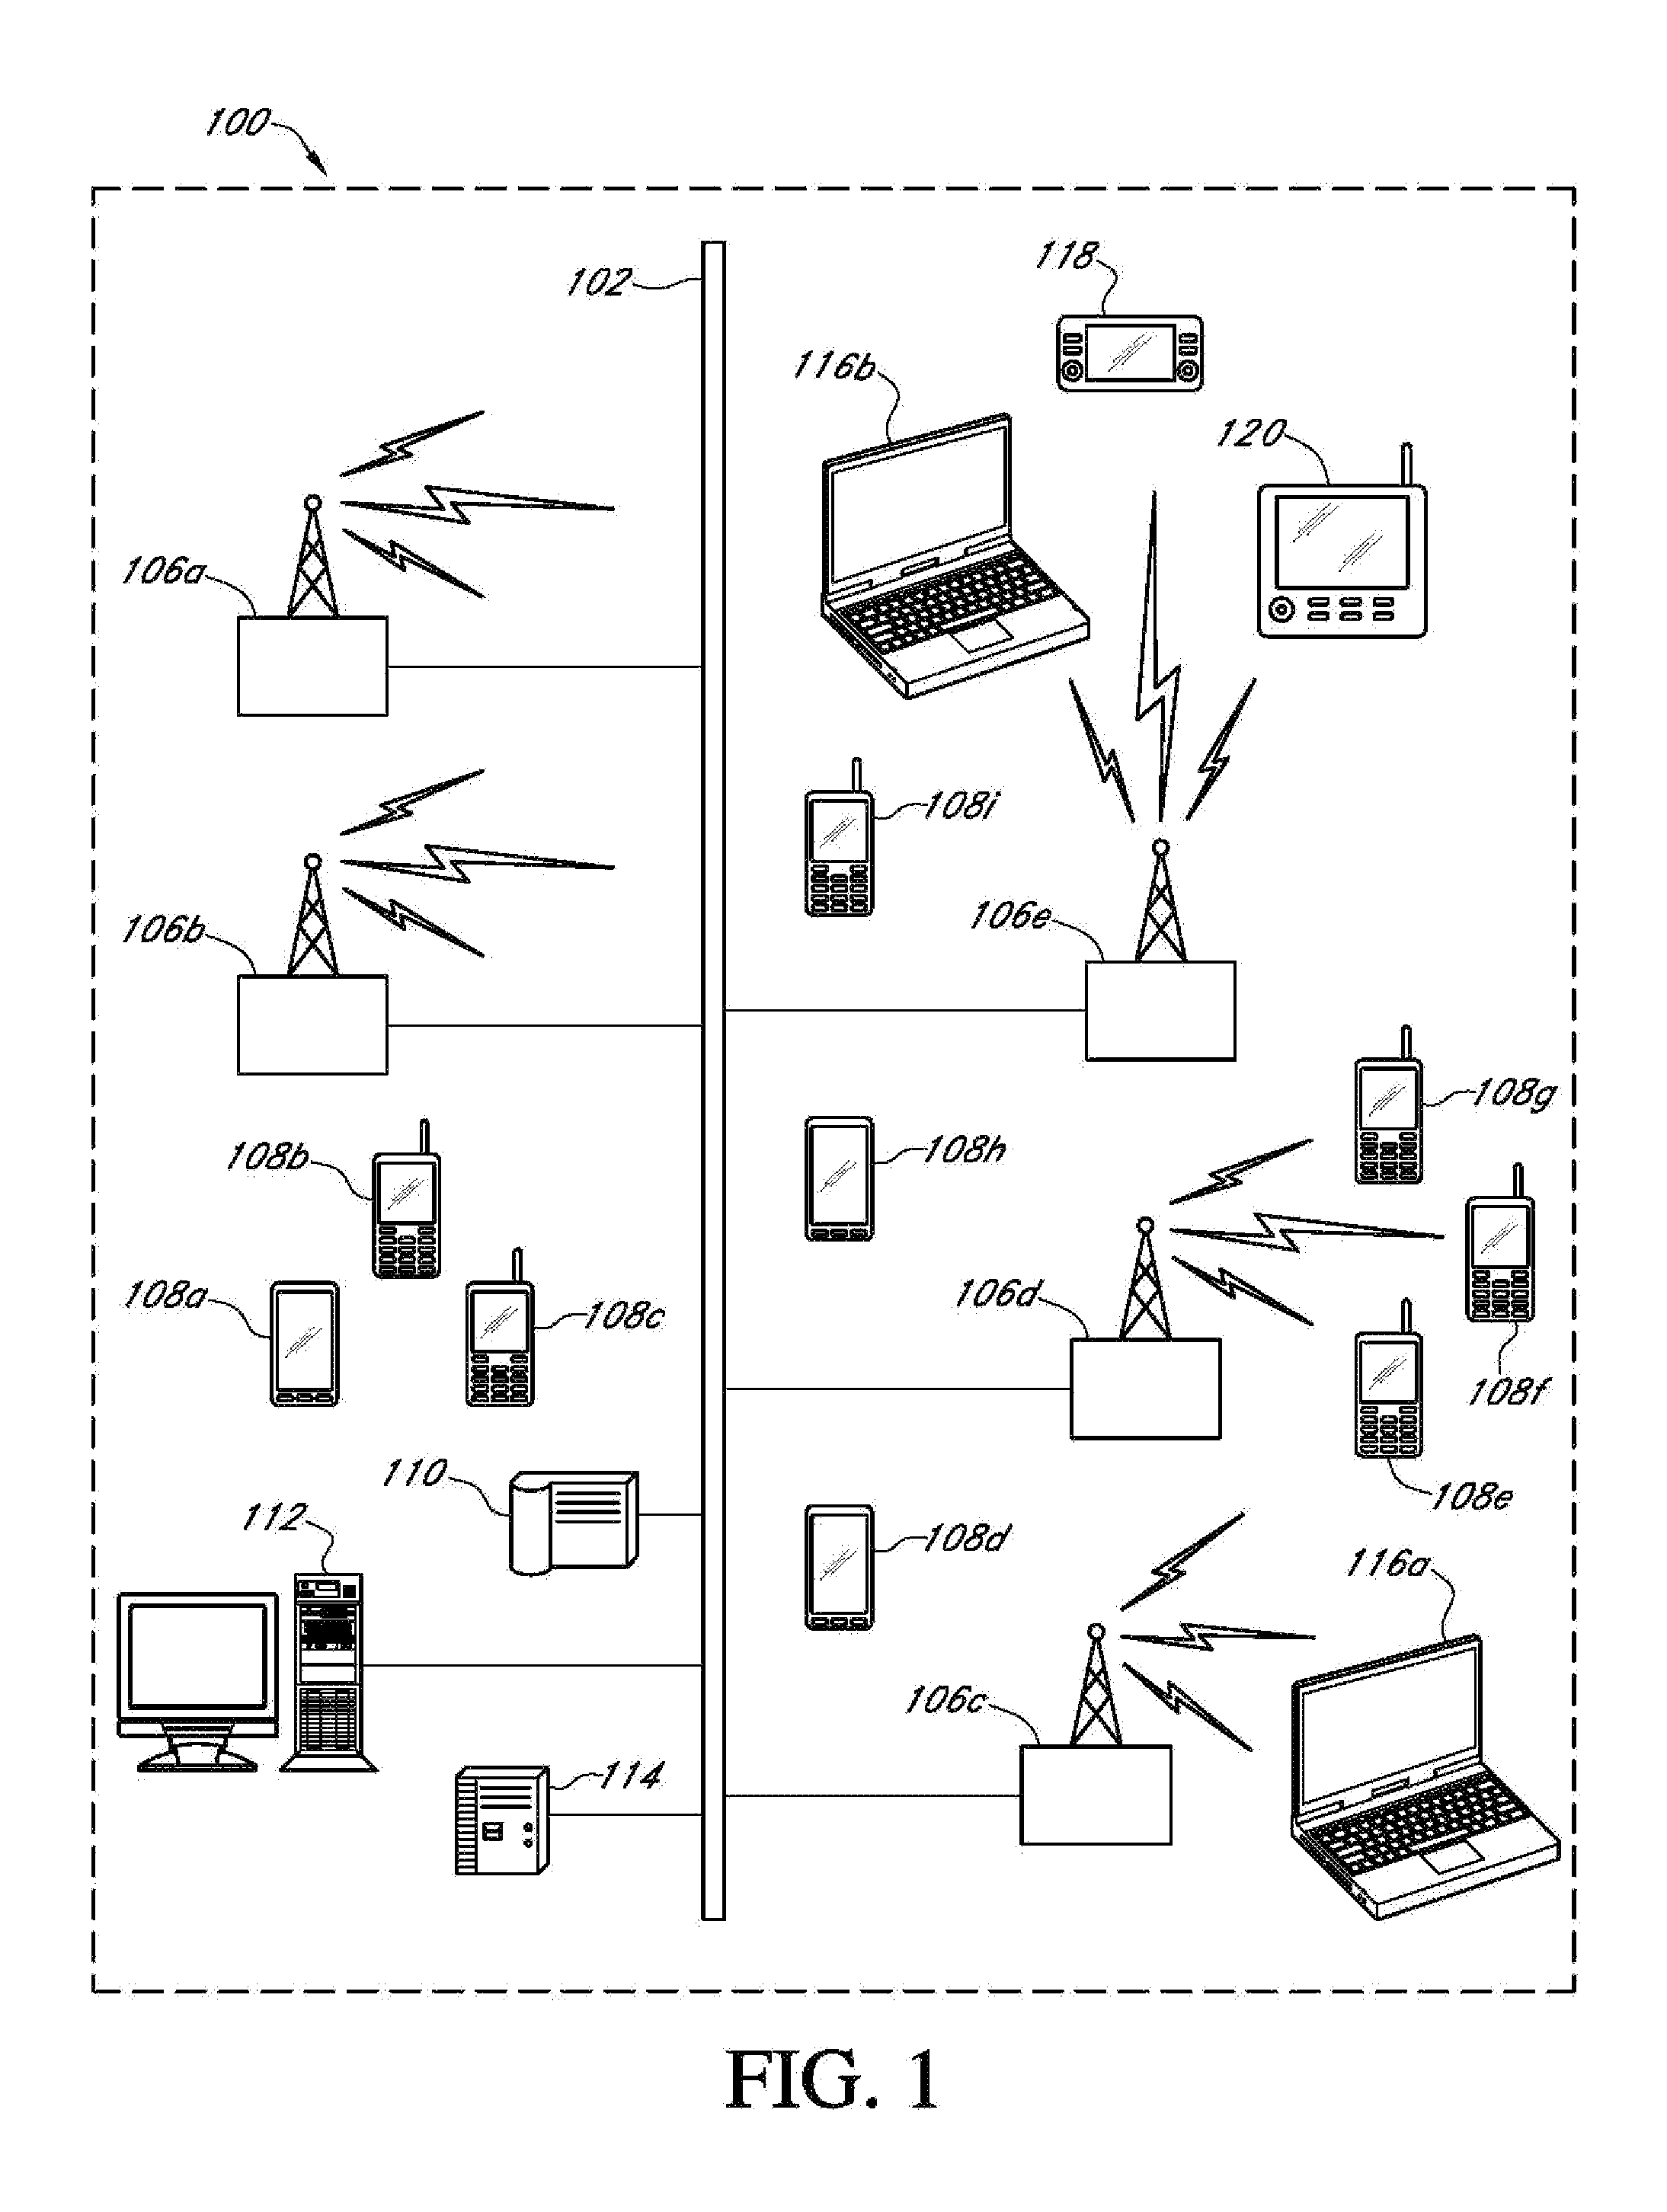 Systems and methods for mitigating intercell interference by coordinated scheduling amongst neighboring cells